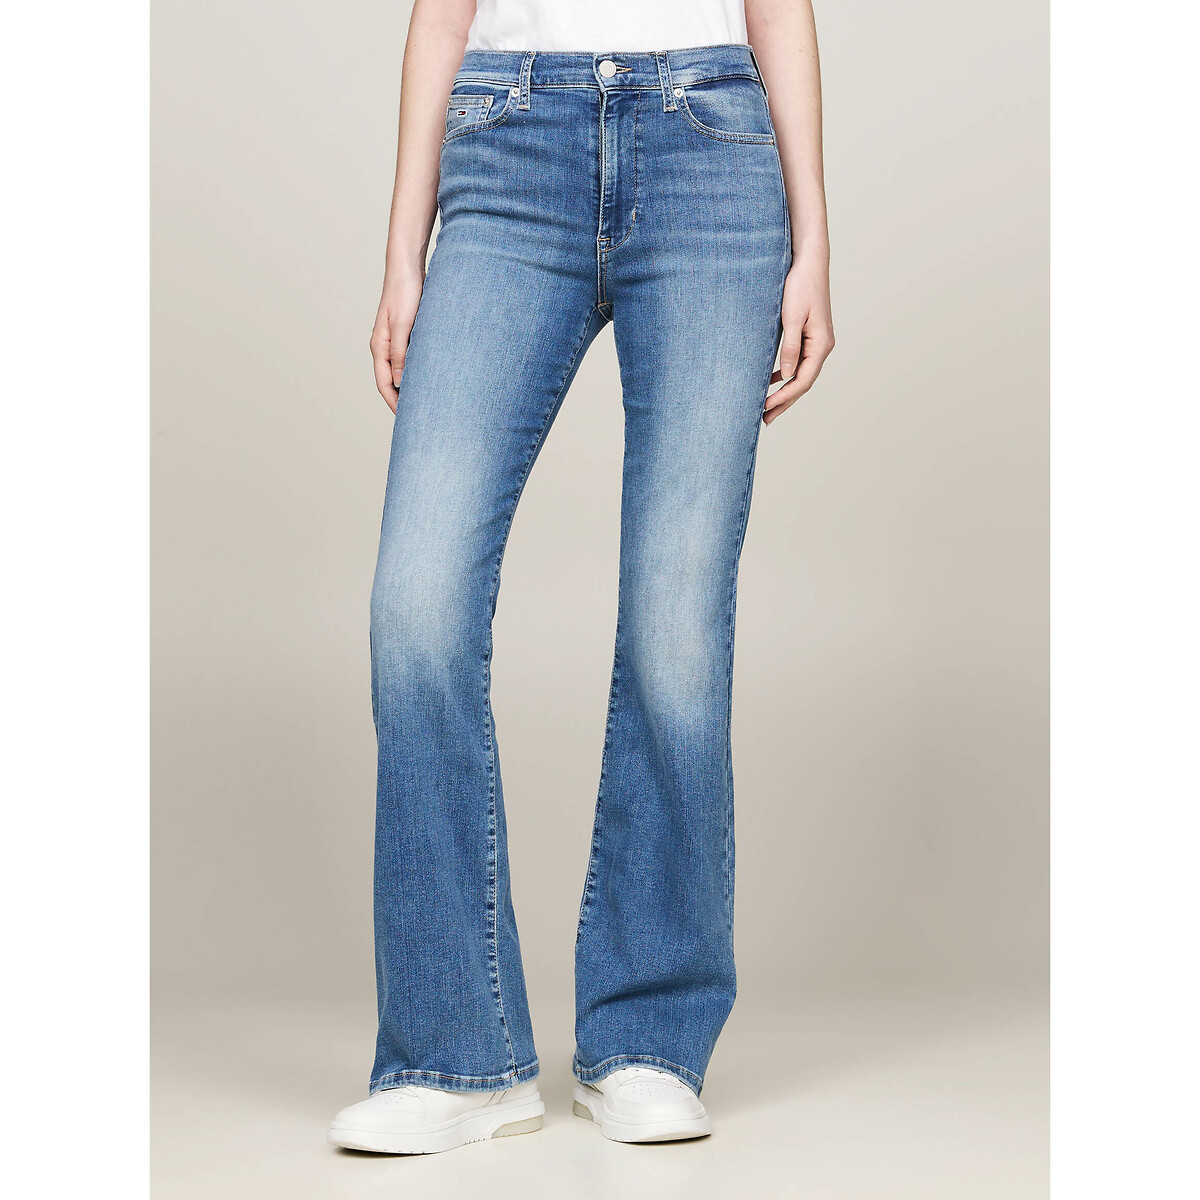 TOMMY JEANS Flare jeans Sylvia, hoge taille